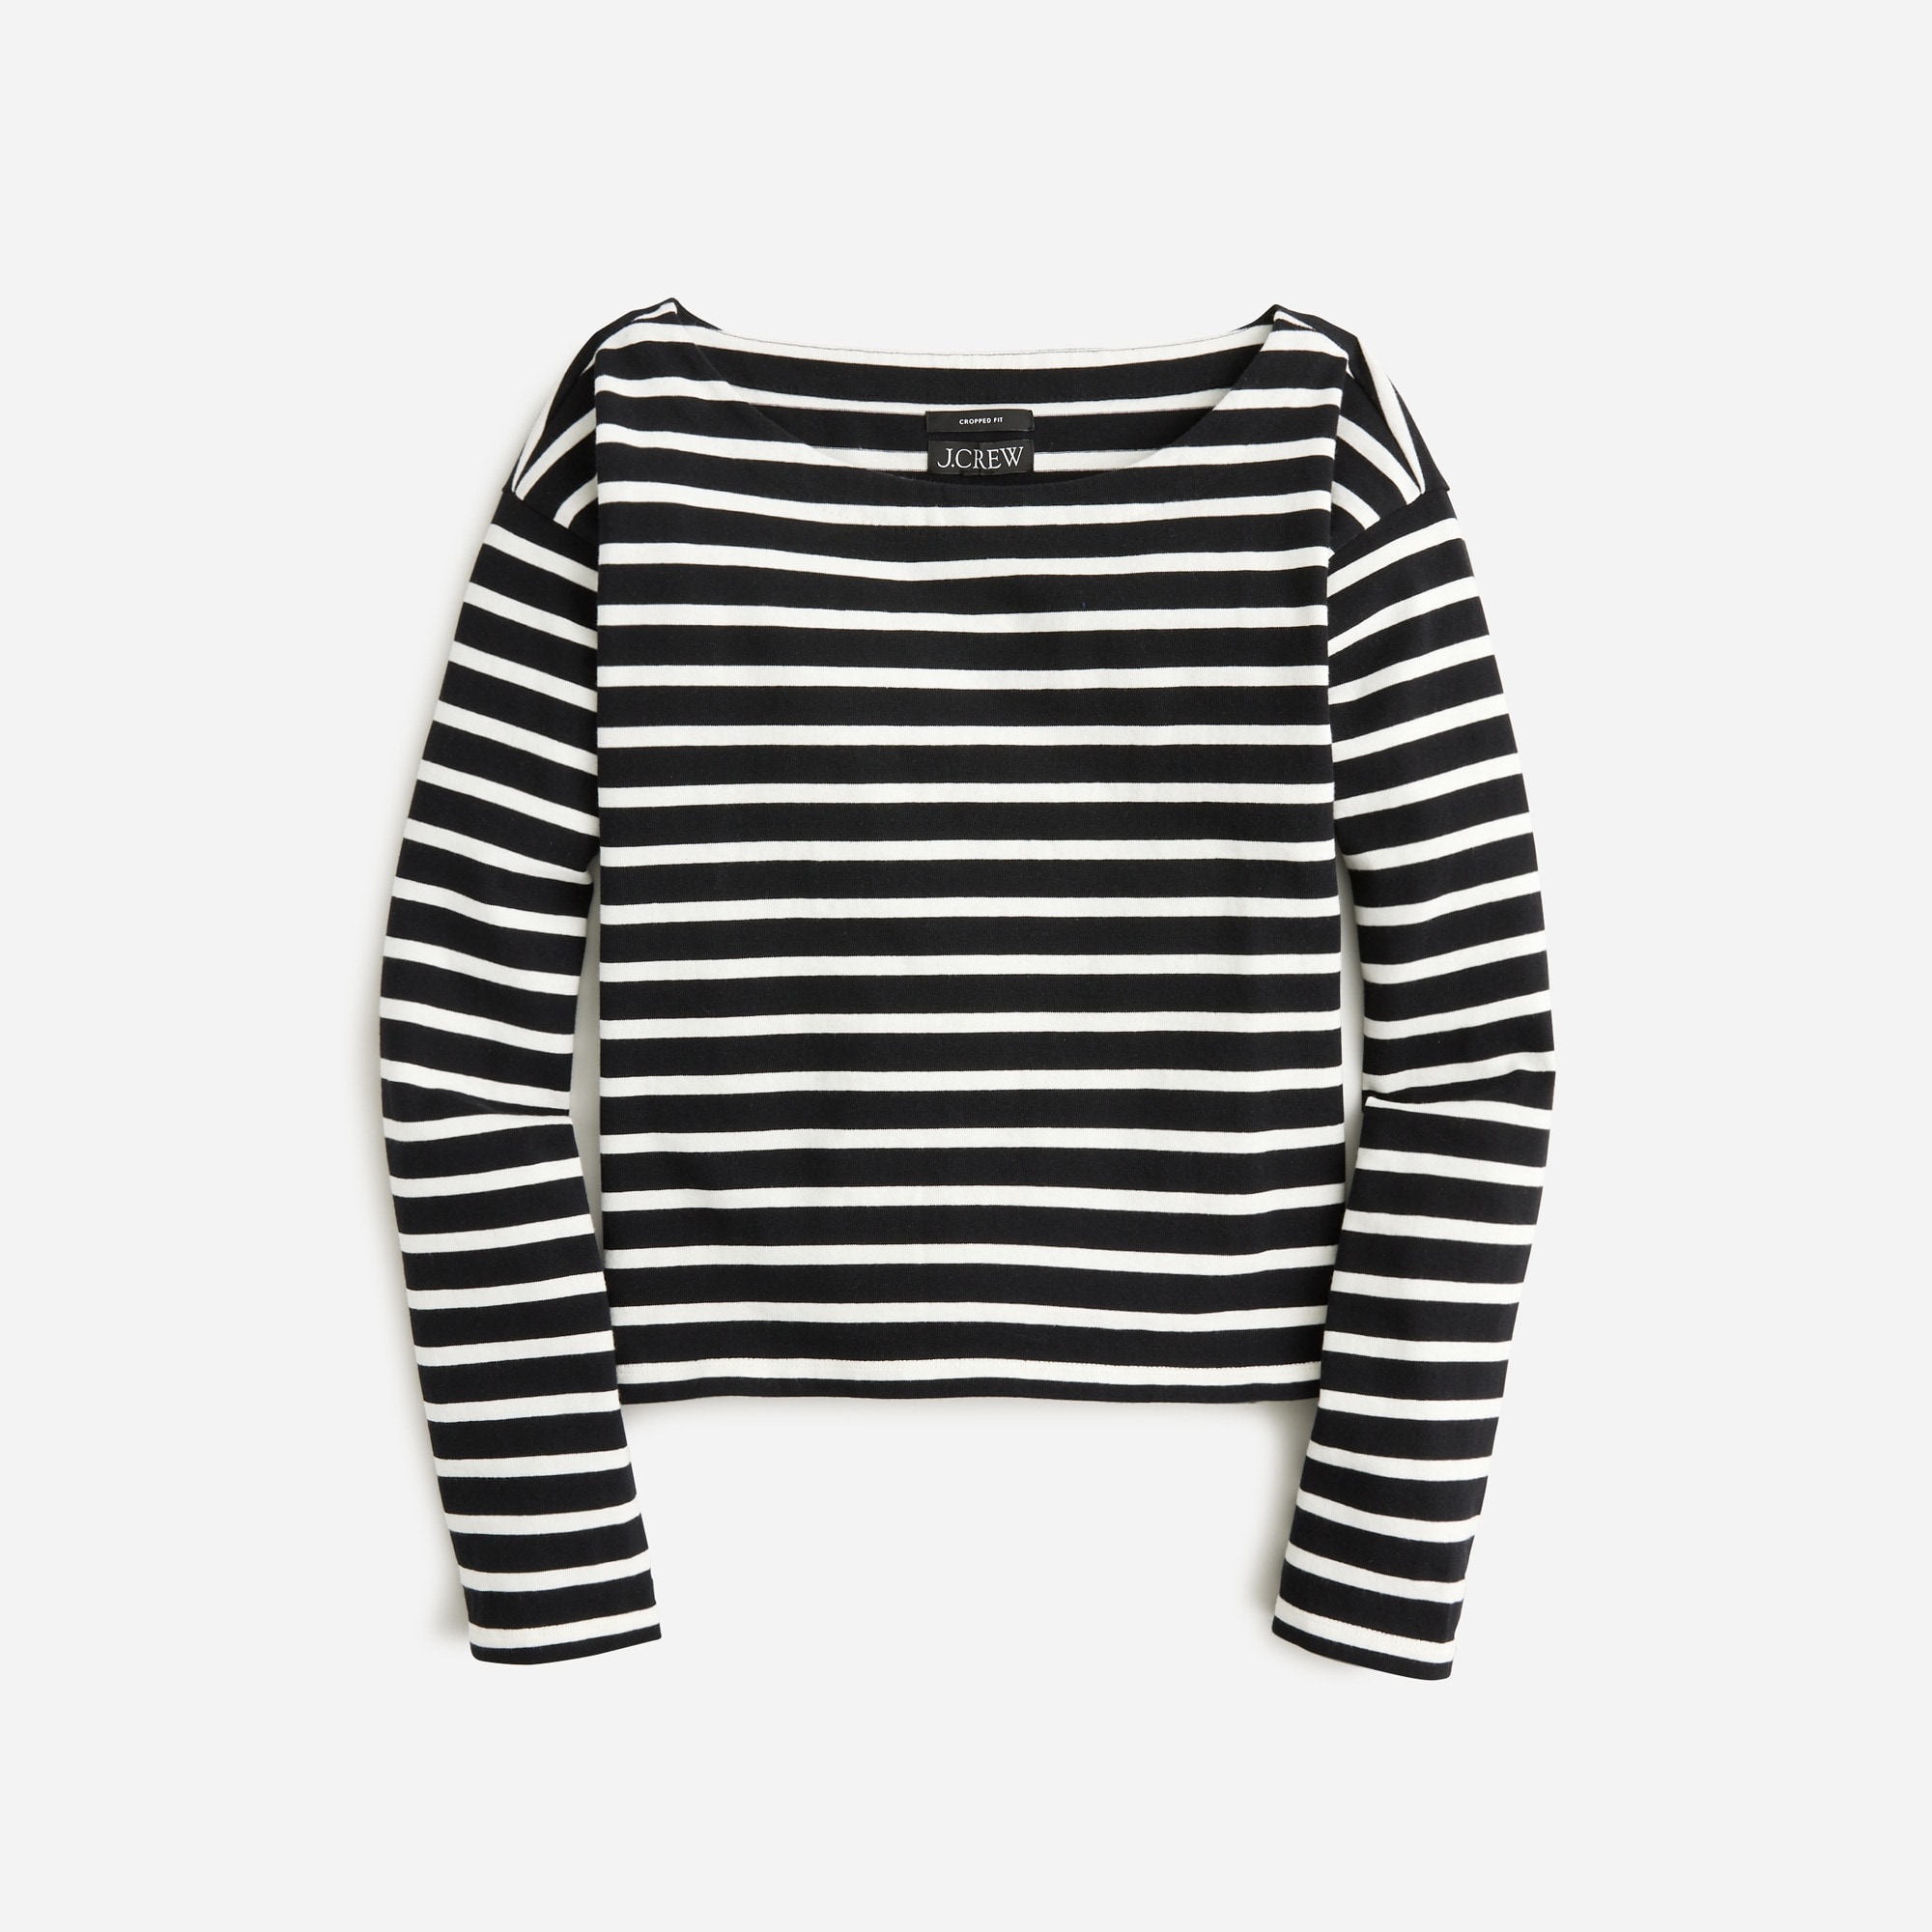  Cropped boatneck T-shirt in stripe